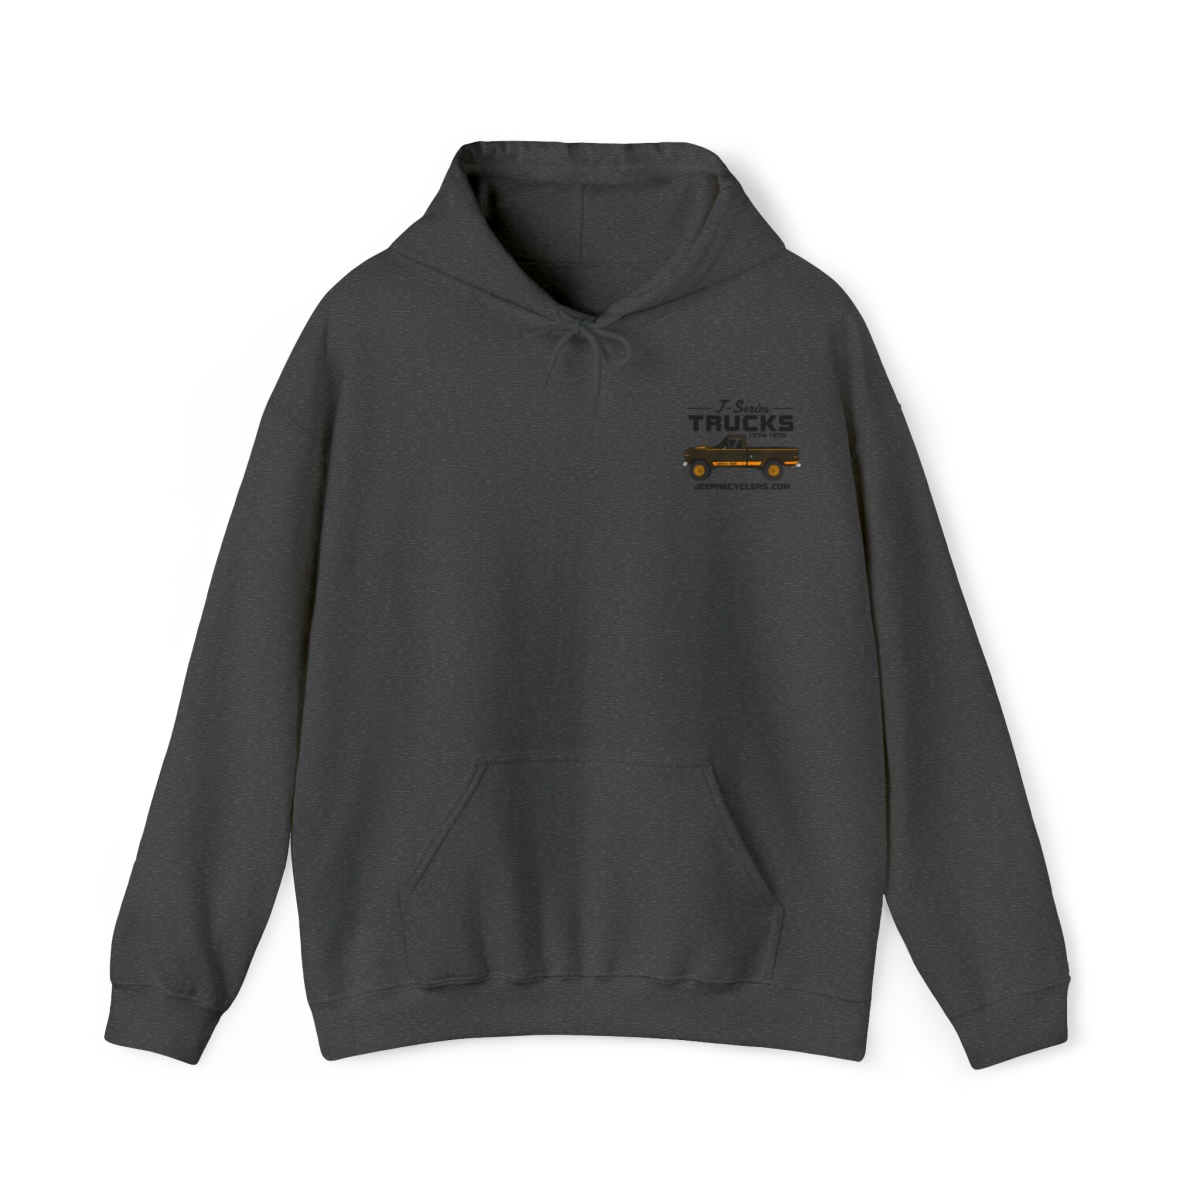 Classic Golden Eagle J-Series Jeep Truck 1974-1979 Hoodie